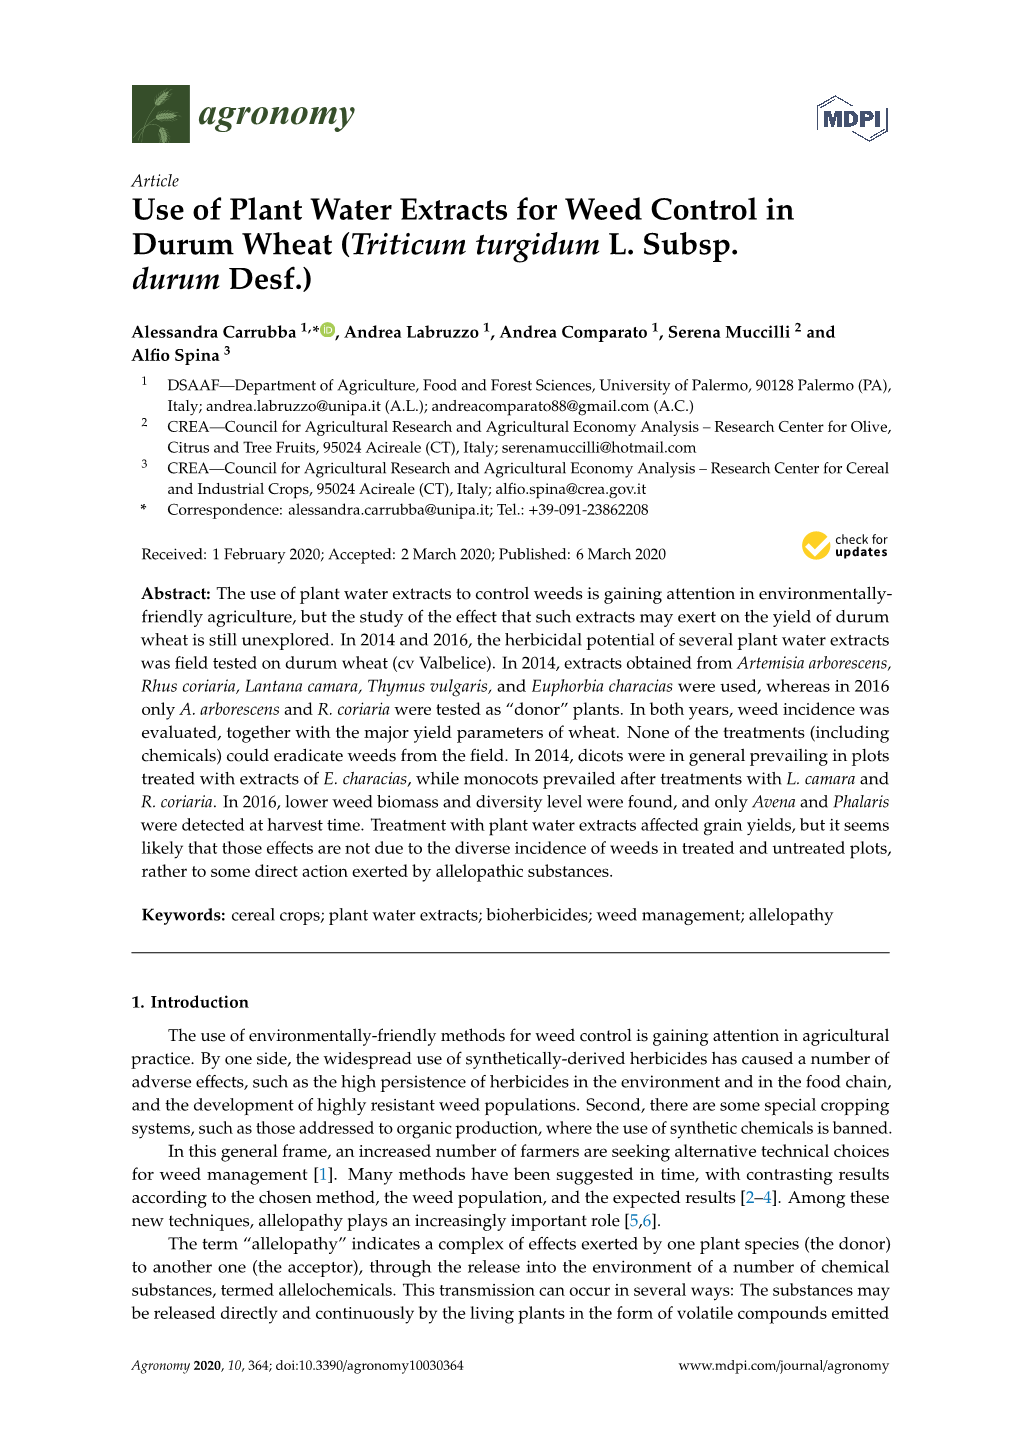 Use of Plant Water Extracts for Weed Control in Durum Wheat (Triticum Turgidum L